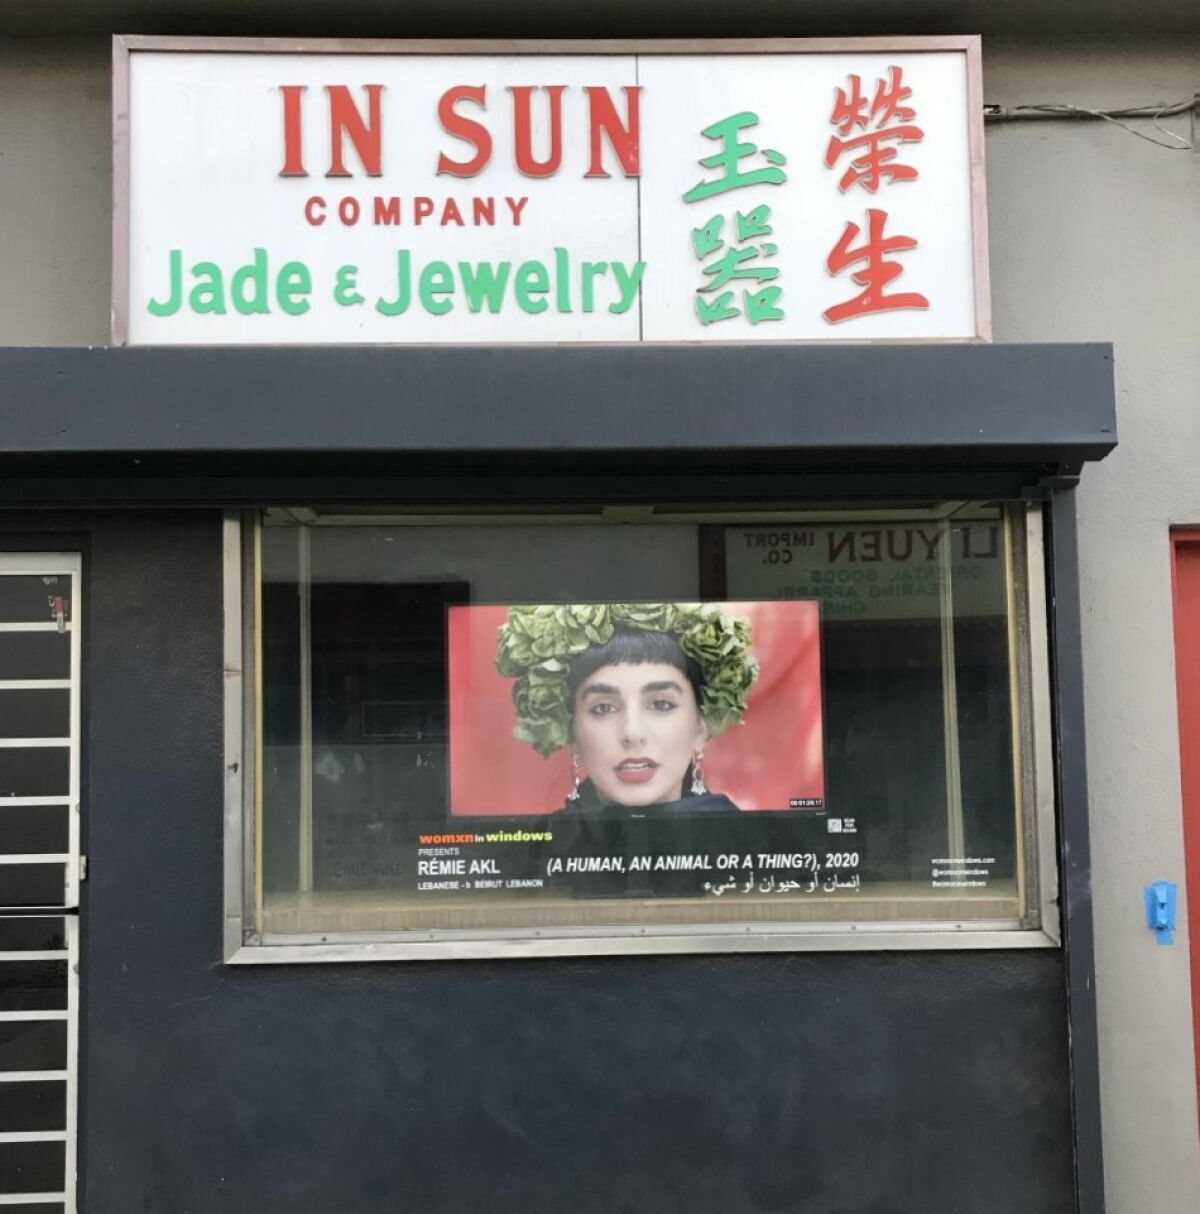 Lebanese artist Rémie Akl, seen in her video installation in the Chung King Road exhibition "Womxn in Windows."